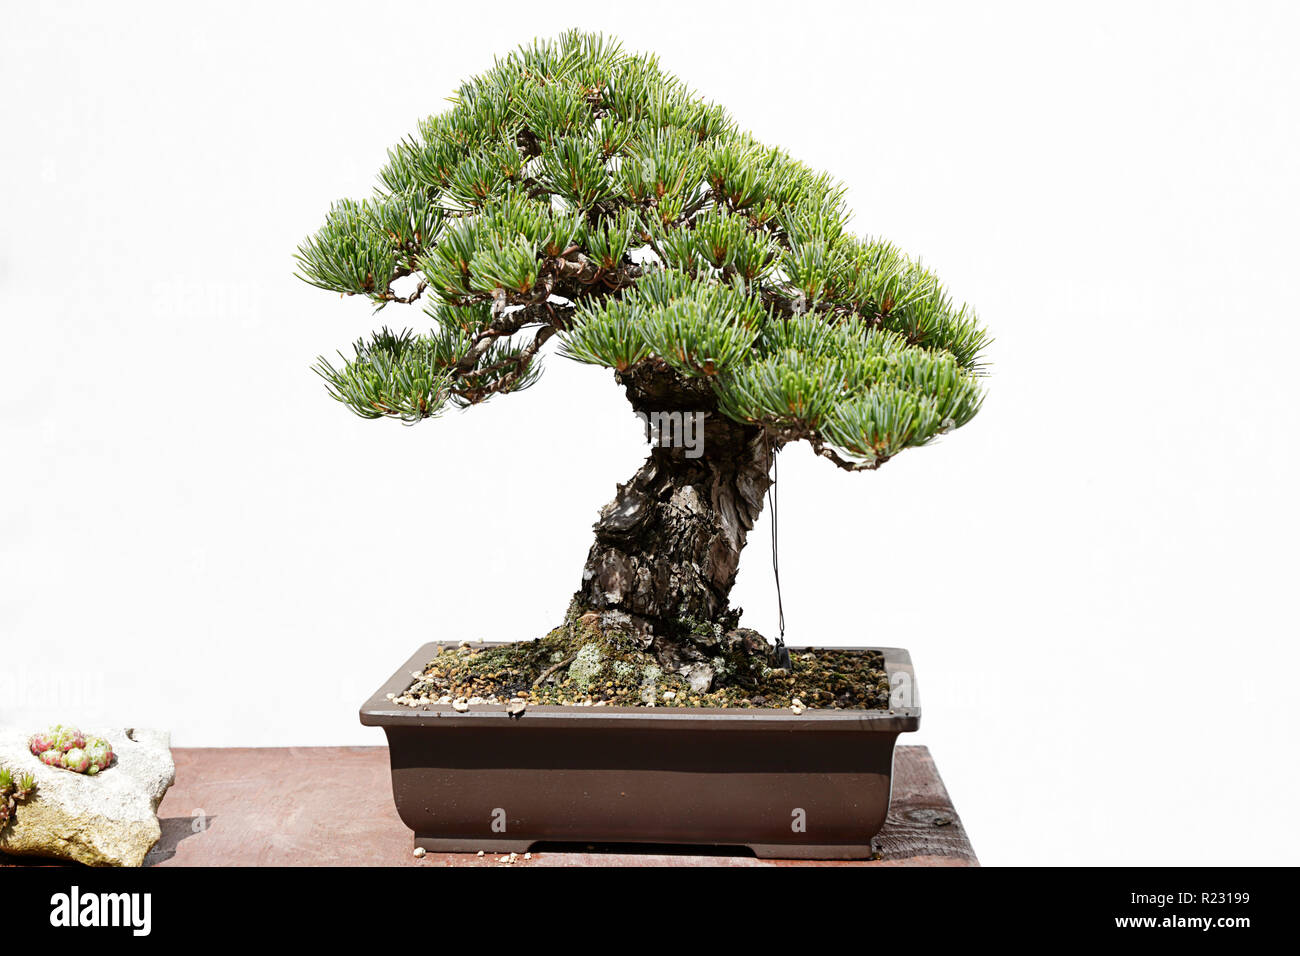 Pinus pentaphylla bonsai on a wooden table and white background Stock Photo